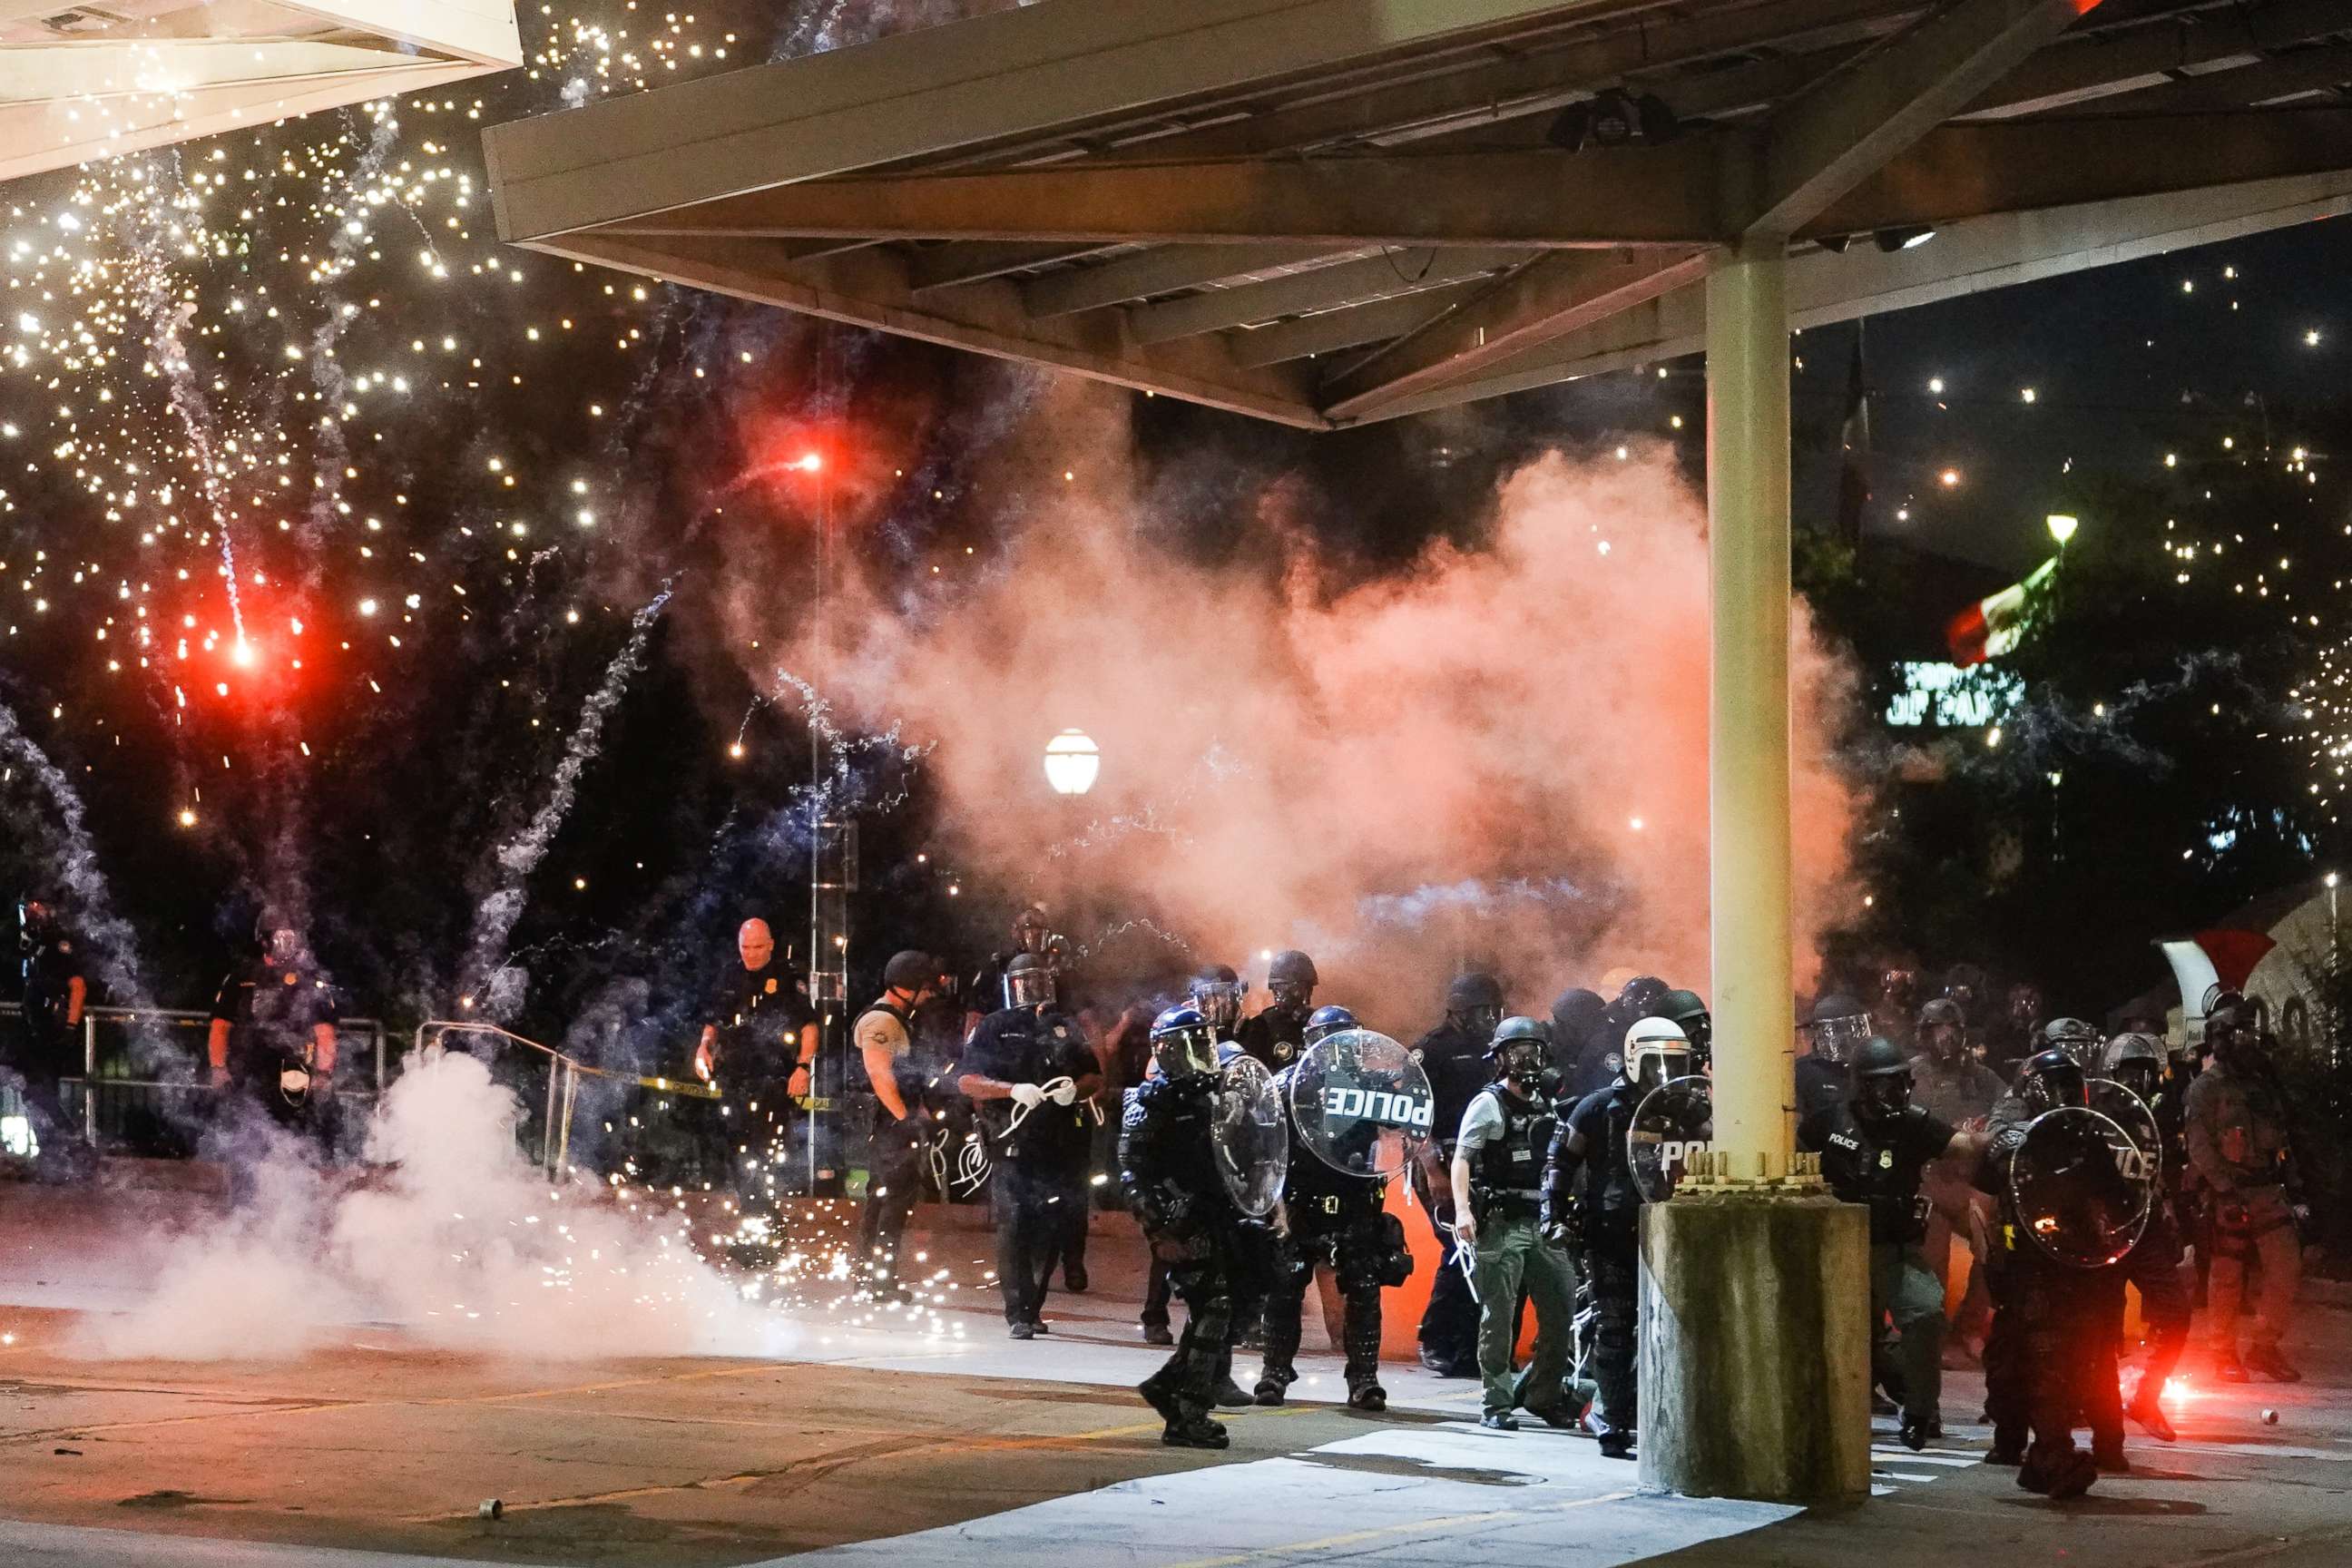 PHOTO: A firework explodes near a police line during a protest in response to the police killing of George Floyd on May 30, 2020, in Atlanta.